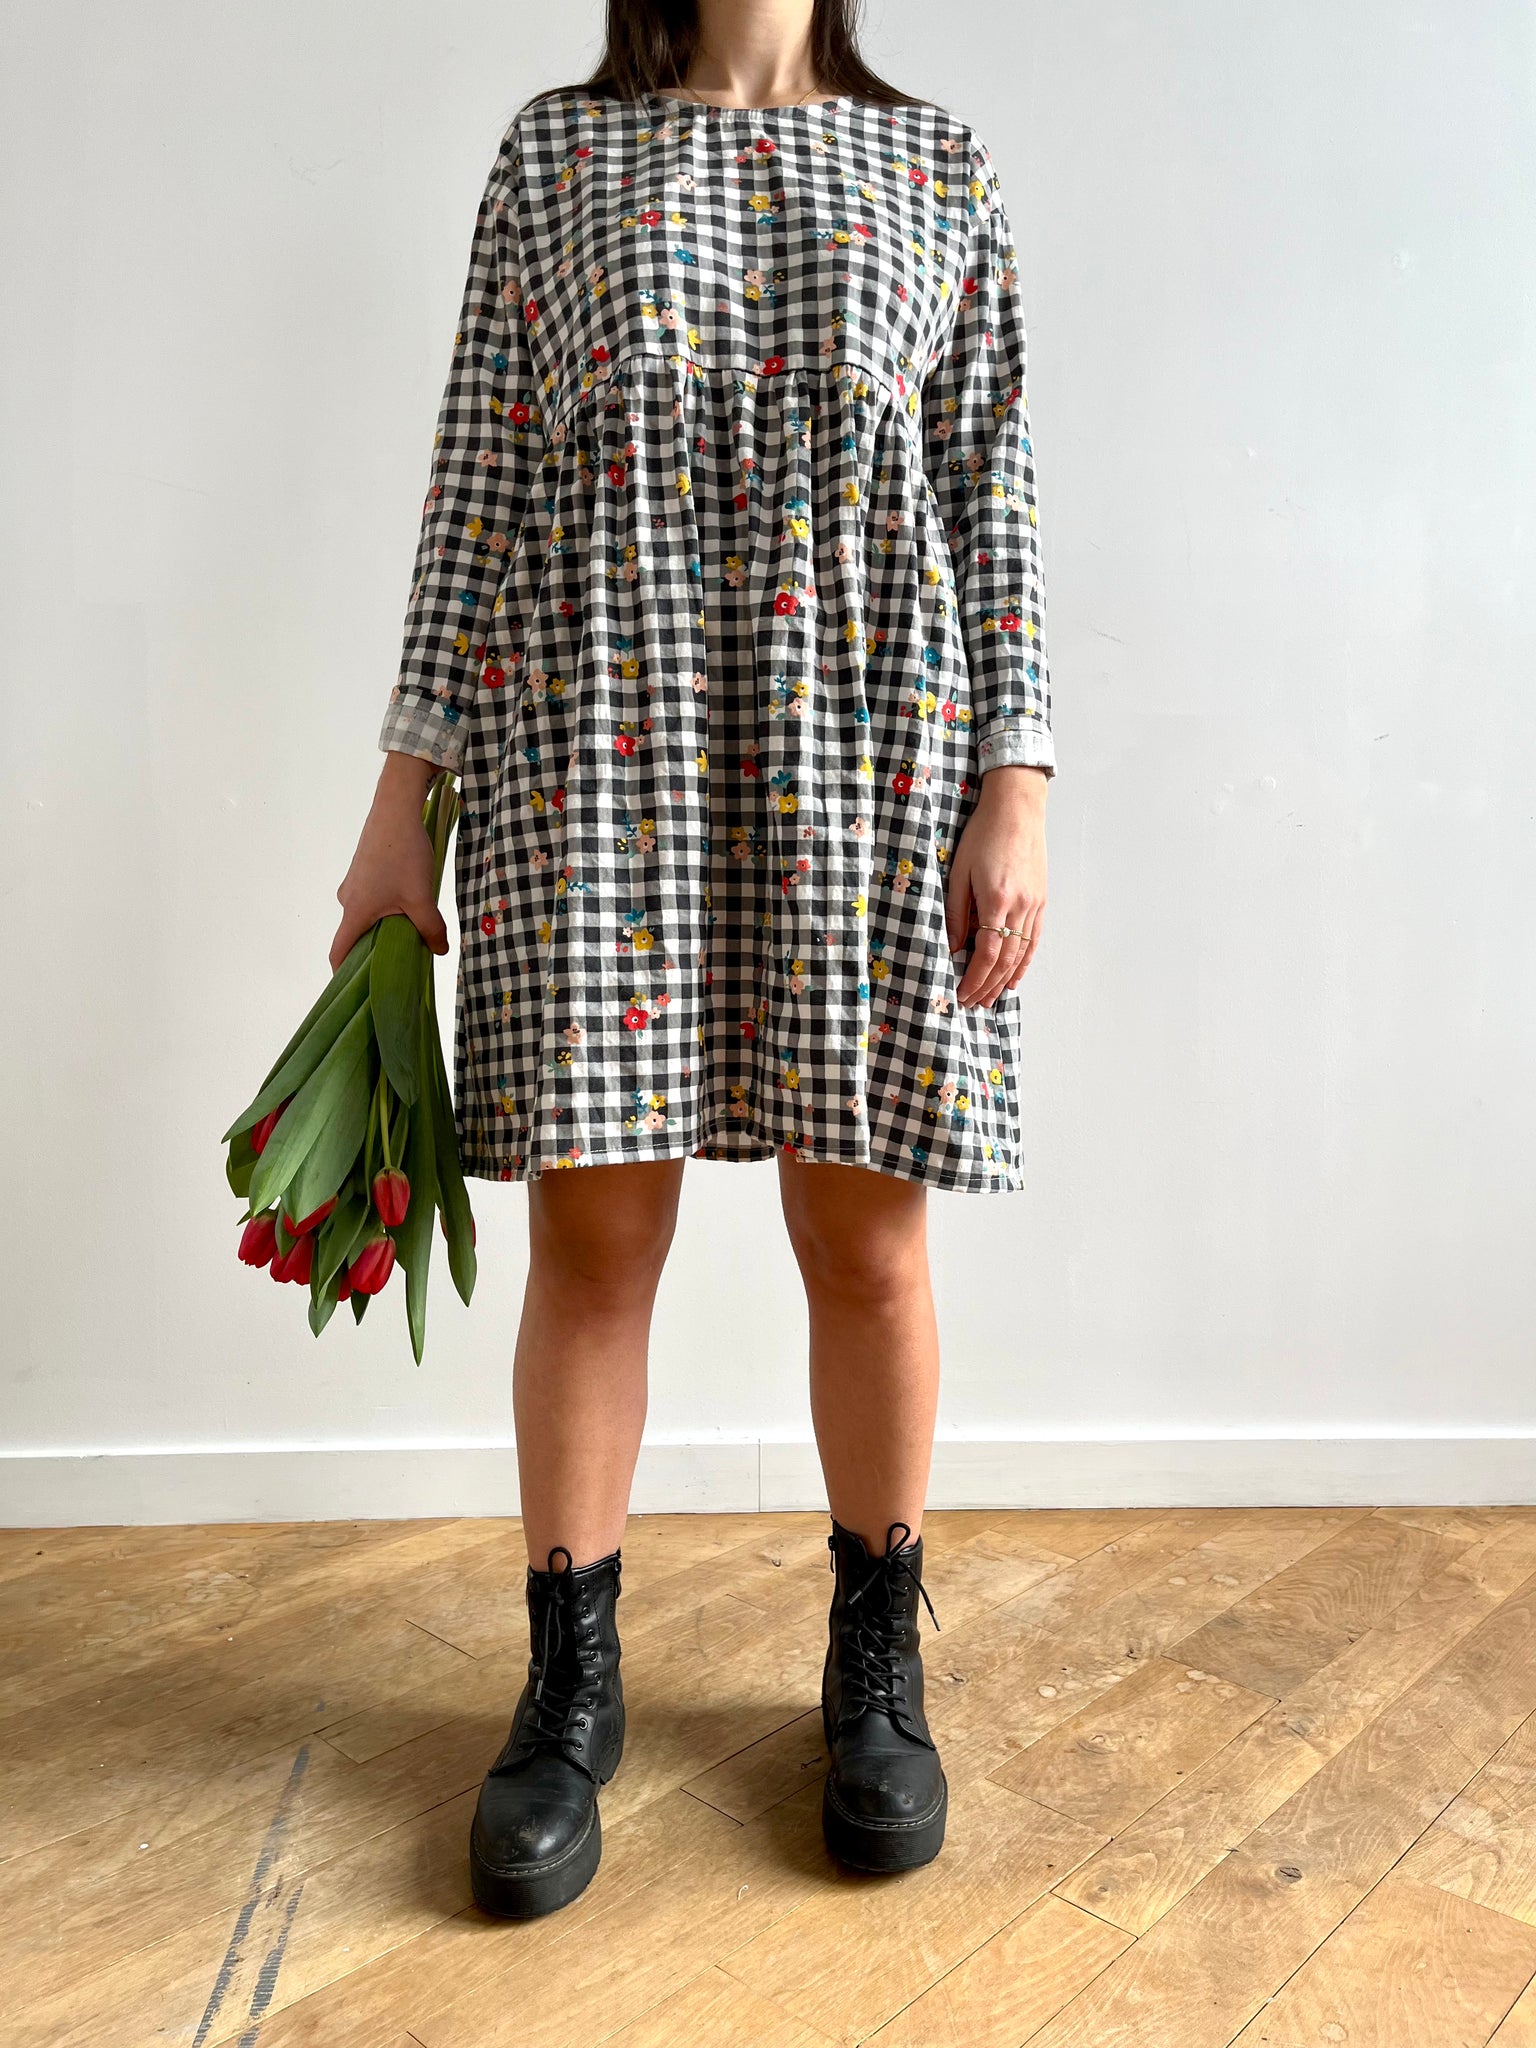 READY TO SHIP L/XL Gingham floral dress